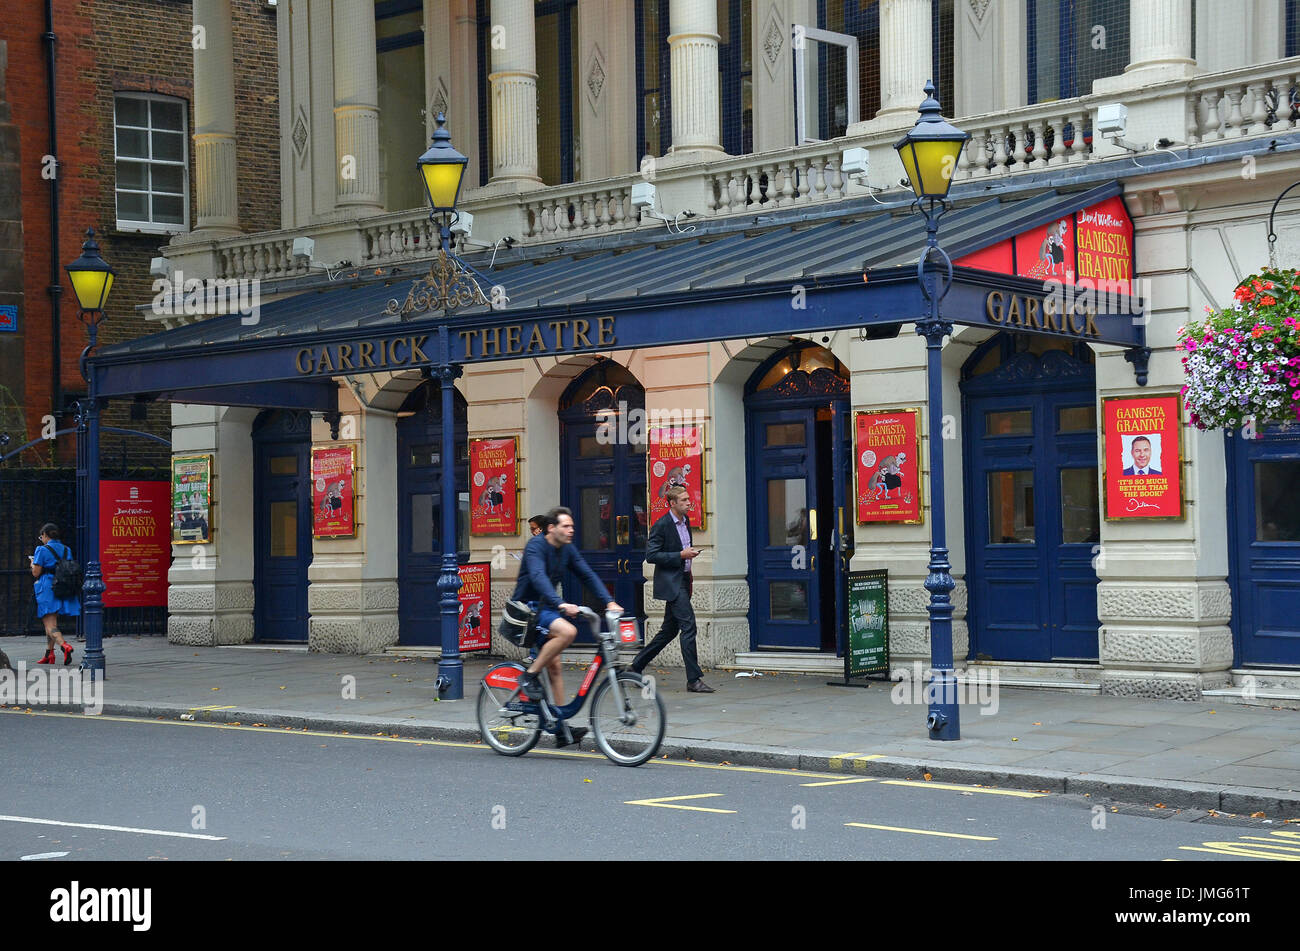 London, UK, 26/07/2017 David Walliams' play Gangsta Granny opens at the Garrick theatre in Charing X road in the West End. Stock Photo